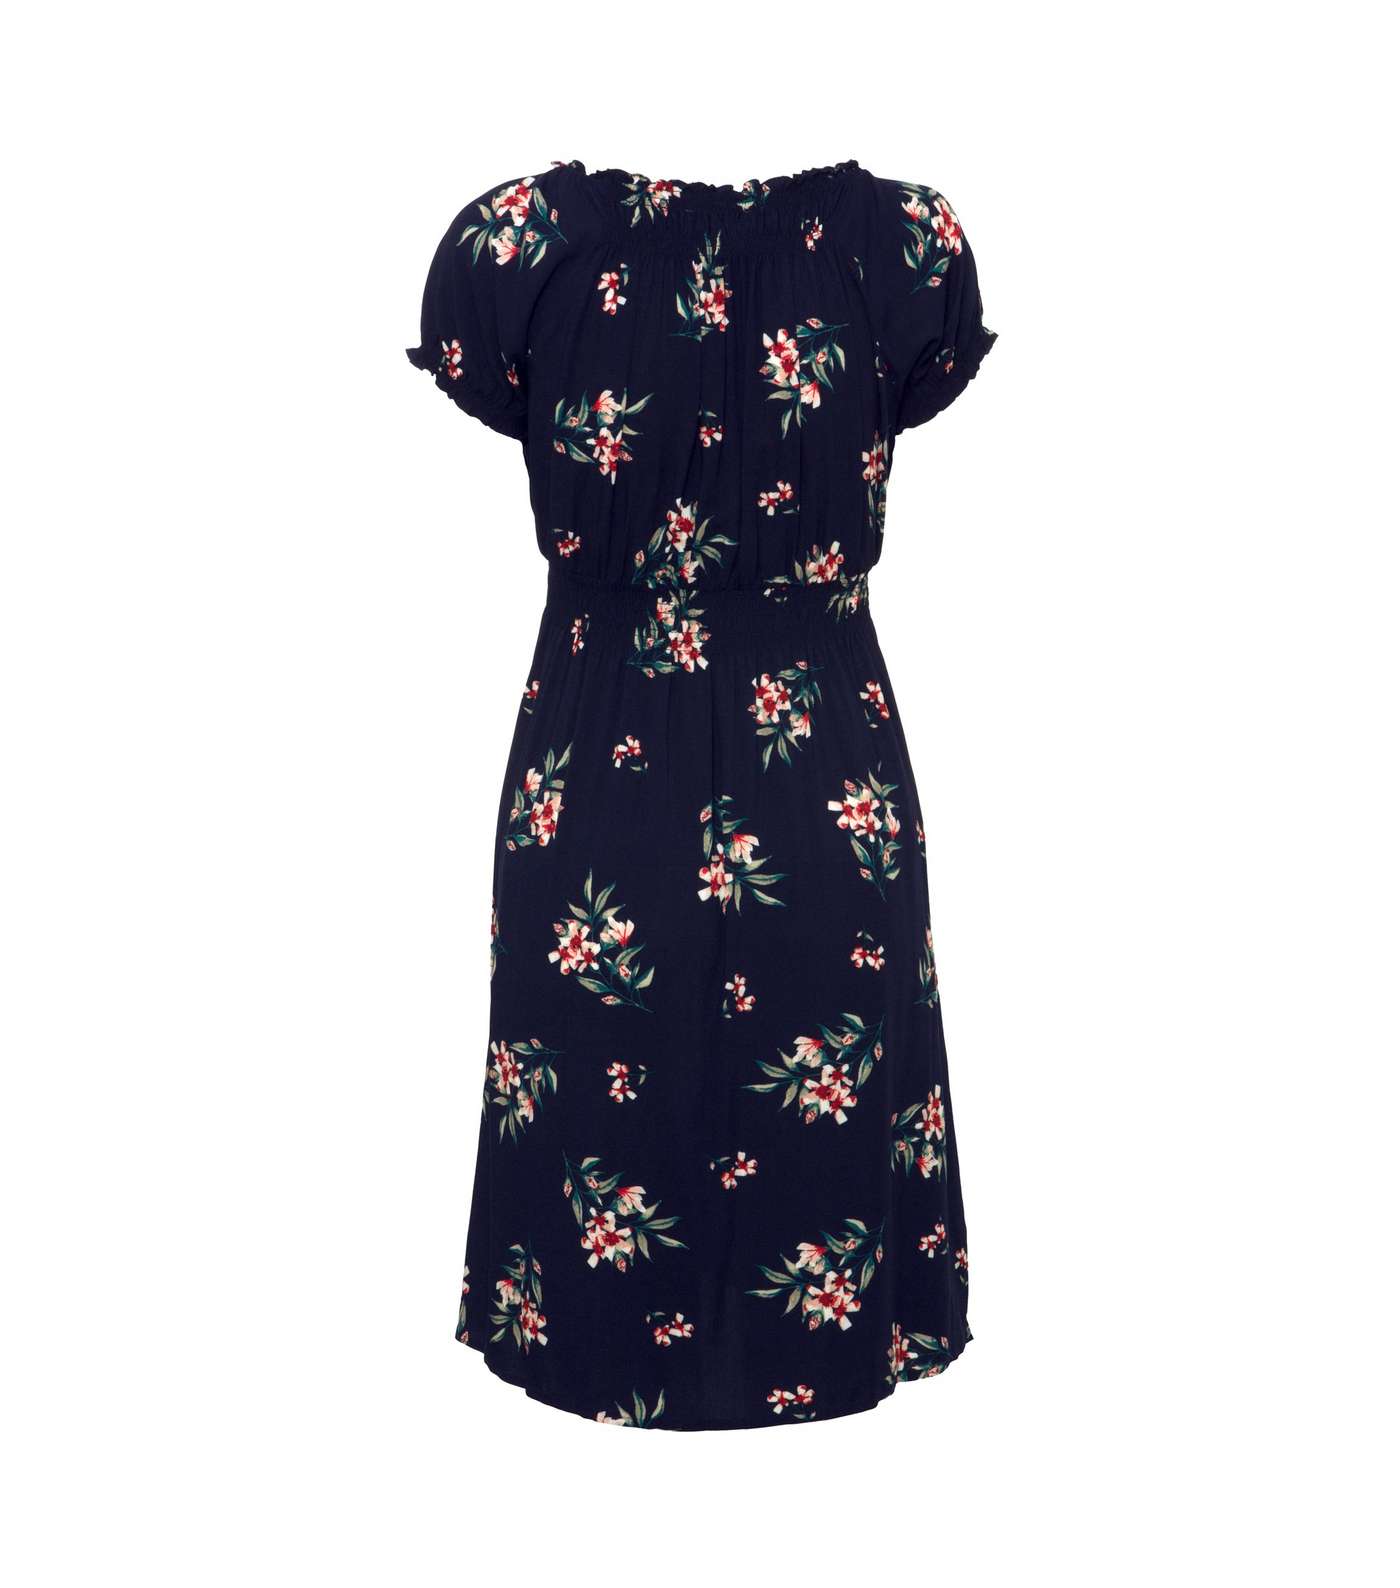 Apricot Navy Floral Milkmaid Dress Image 5